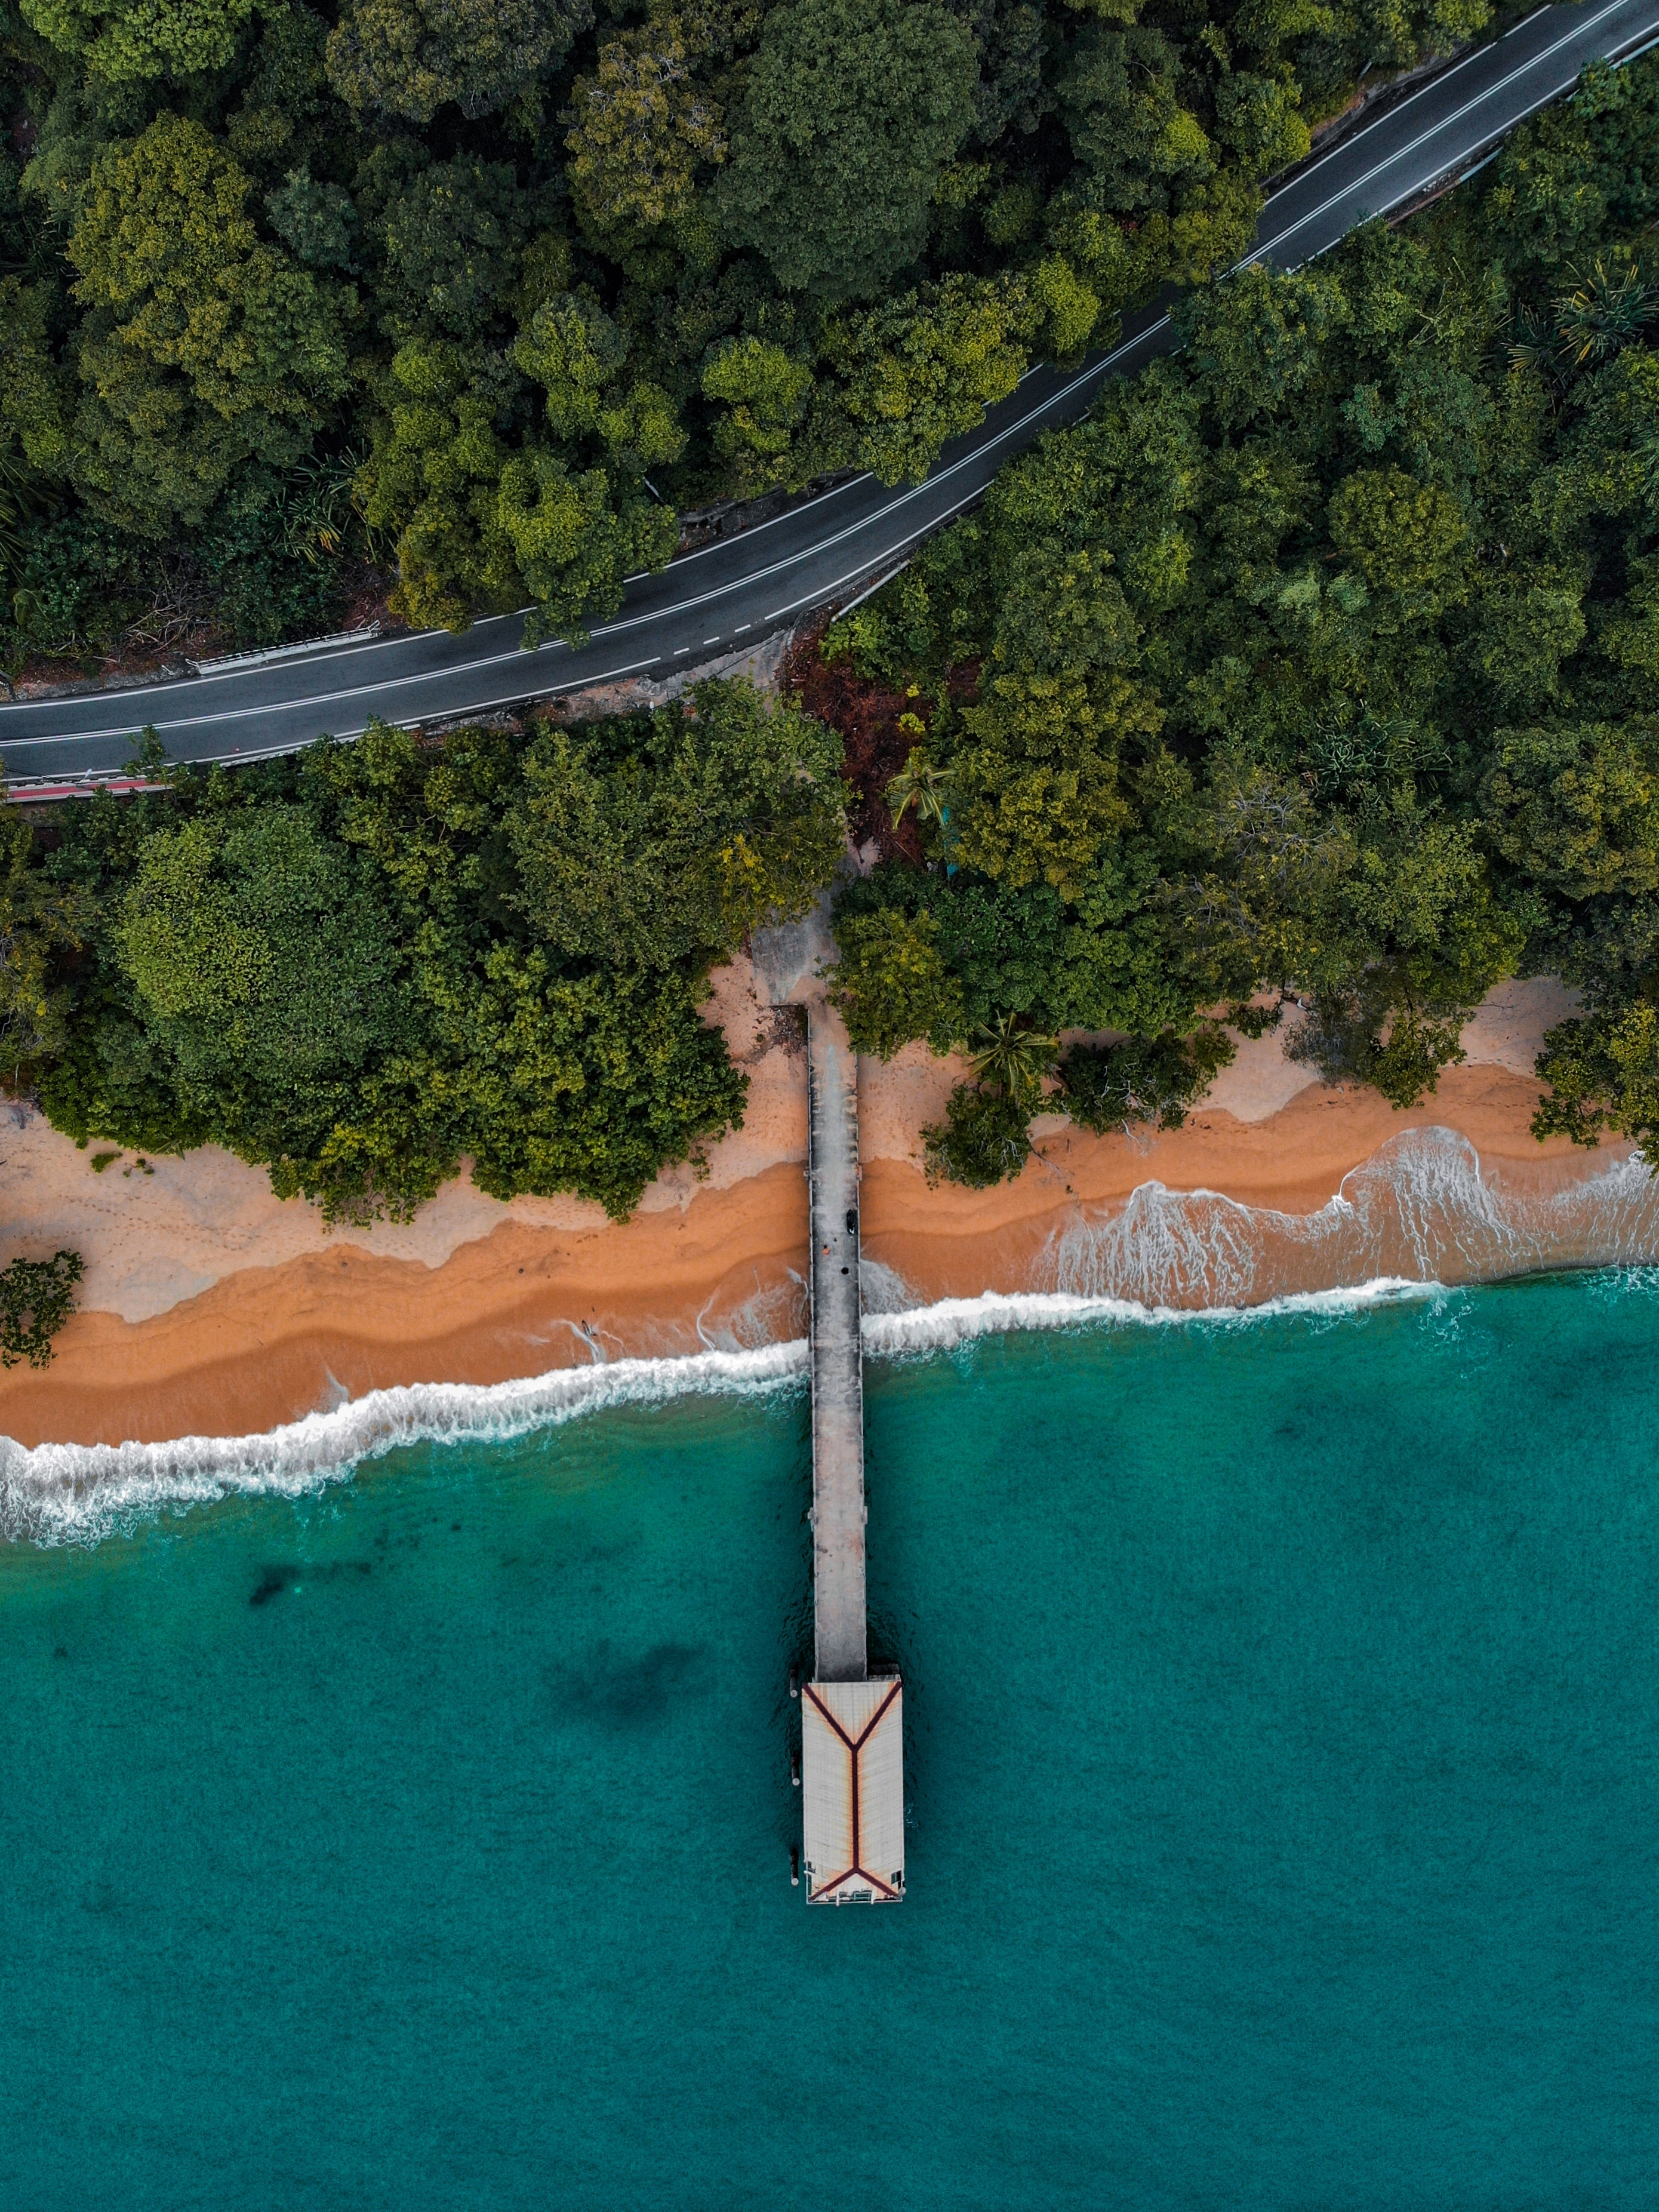 view from above, nature, trees, coast, pier, bungalow 1080p